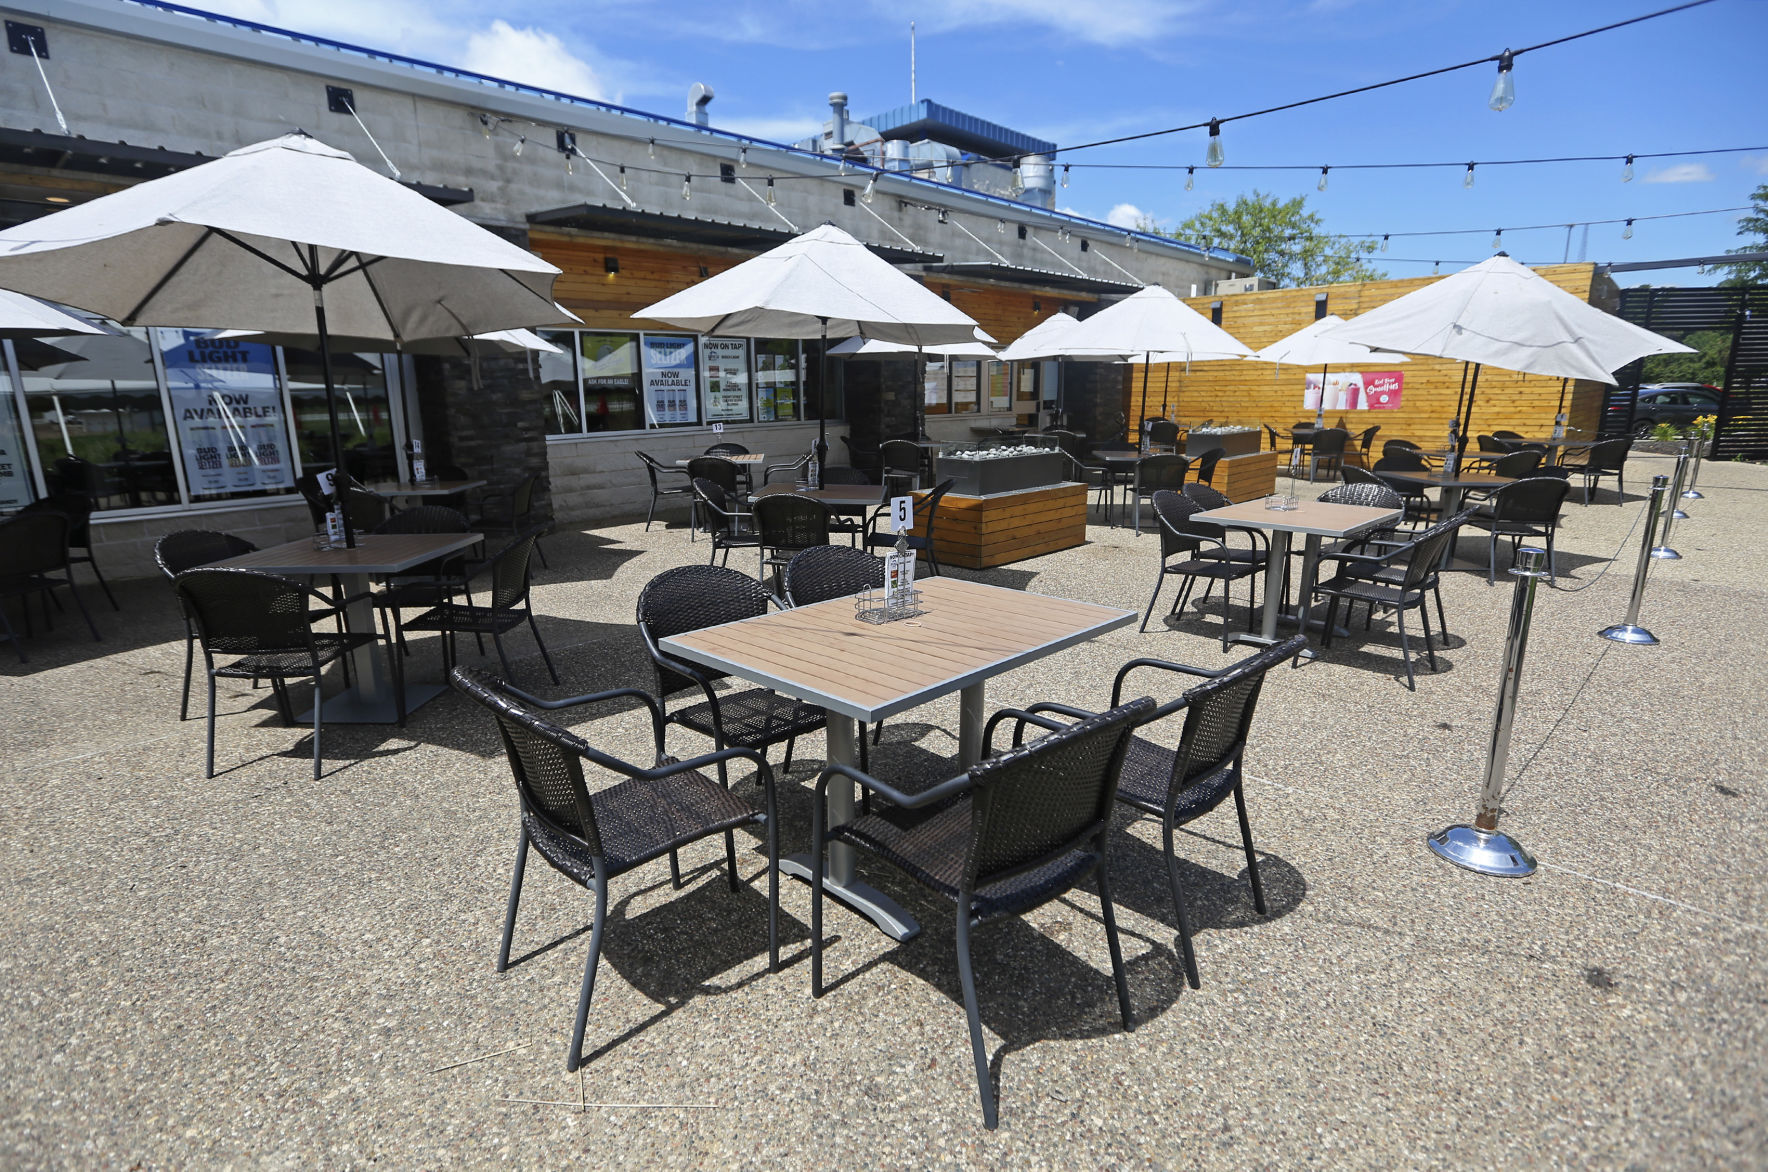 Outdoor seating at Frentress Lake Bar & Grill in East Dubuque, Ill., on Thursday, July 16, 2020. PHOTO CREDIT: NICKI KOHL